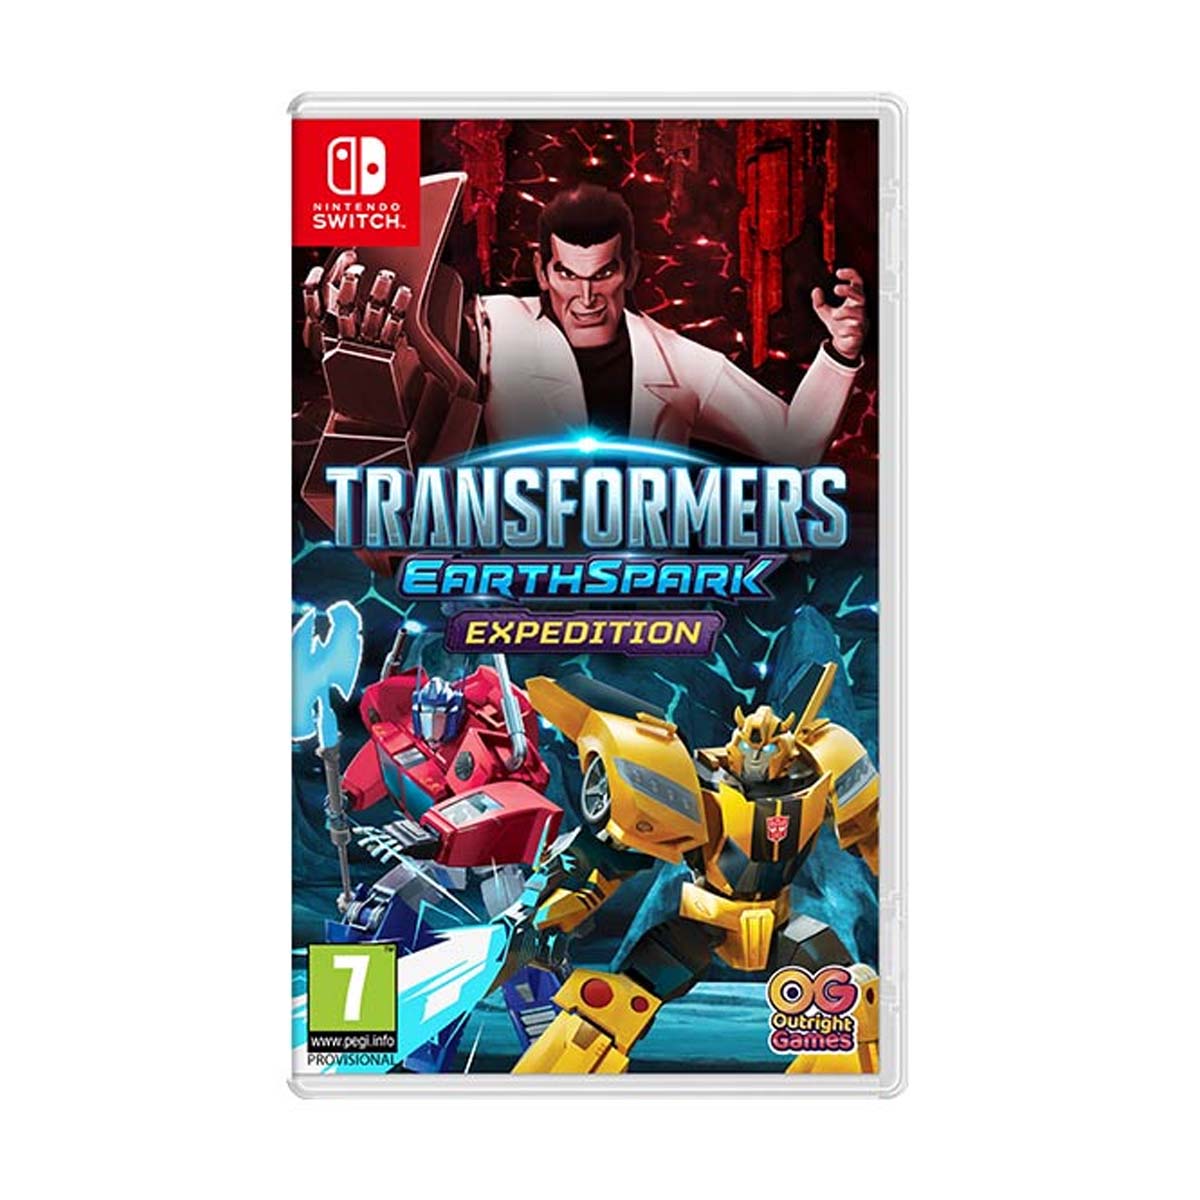 Transformers Earth Spark Expedition. The Transformers (игра). Трансформер Switch. Игрушка с дисками трансформер.